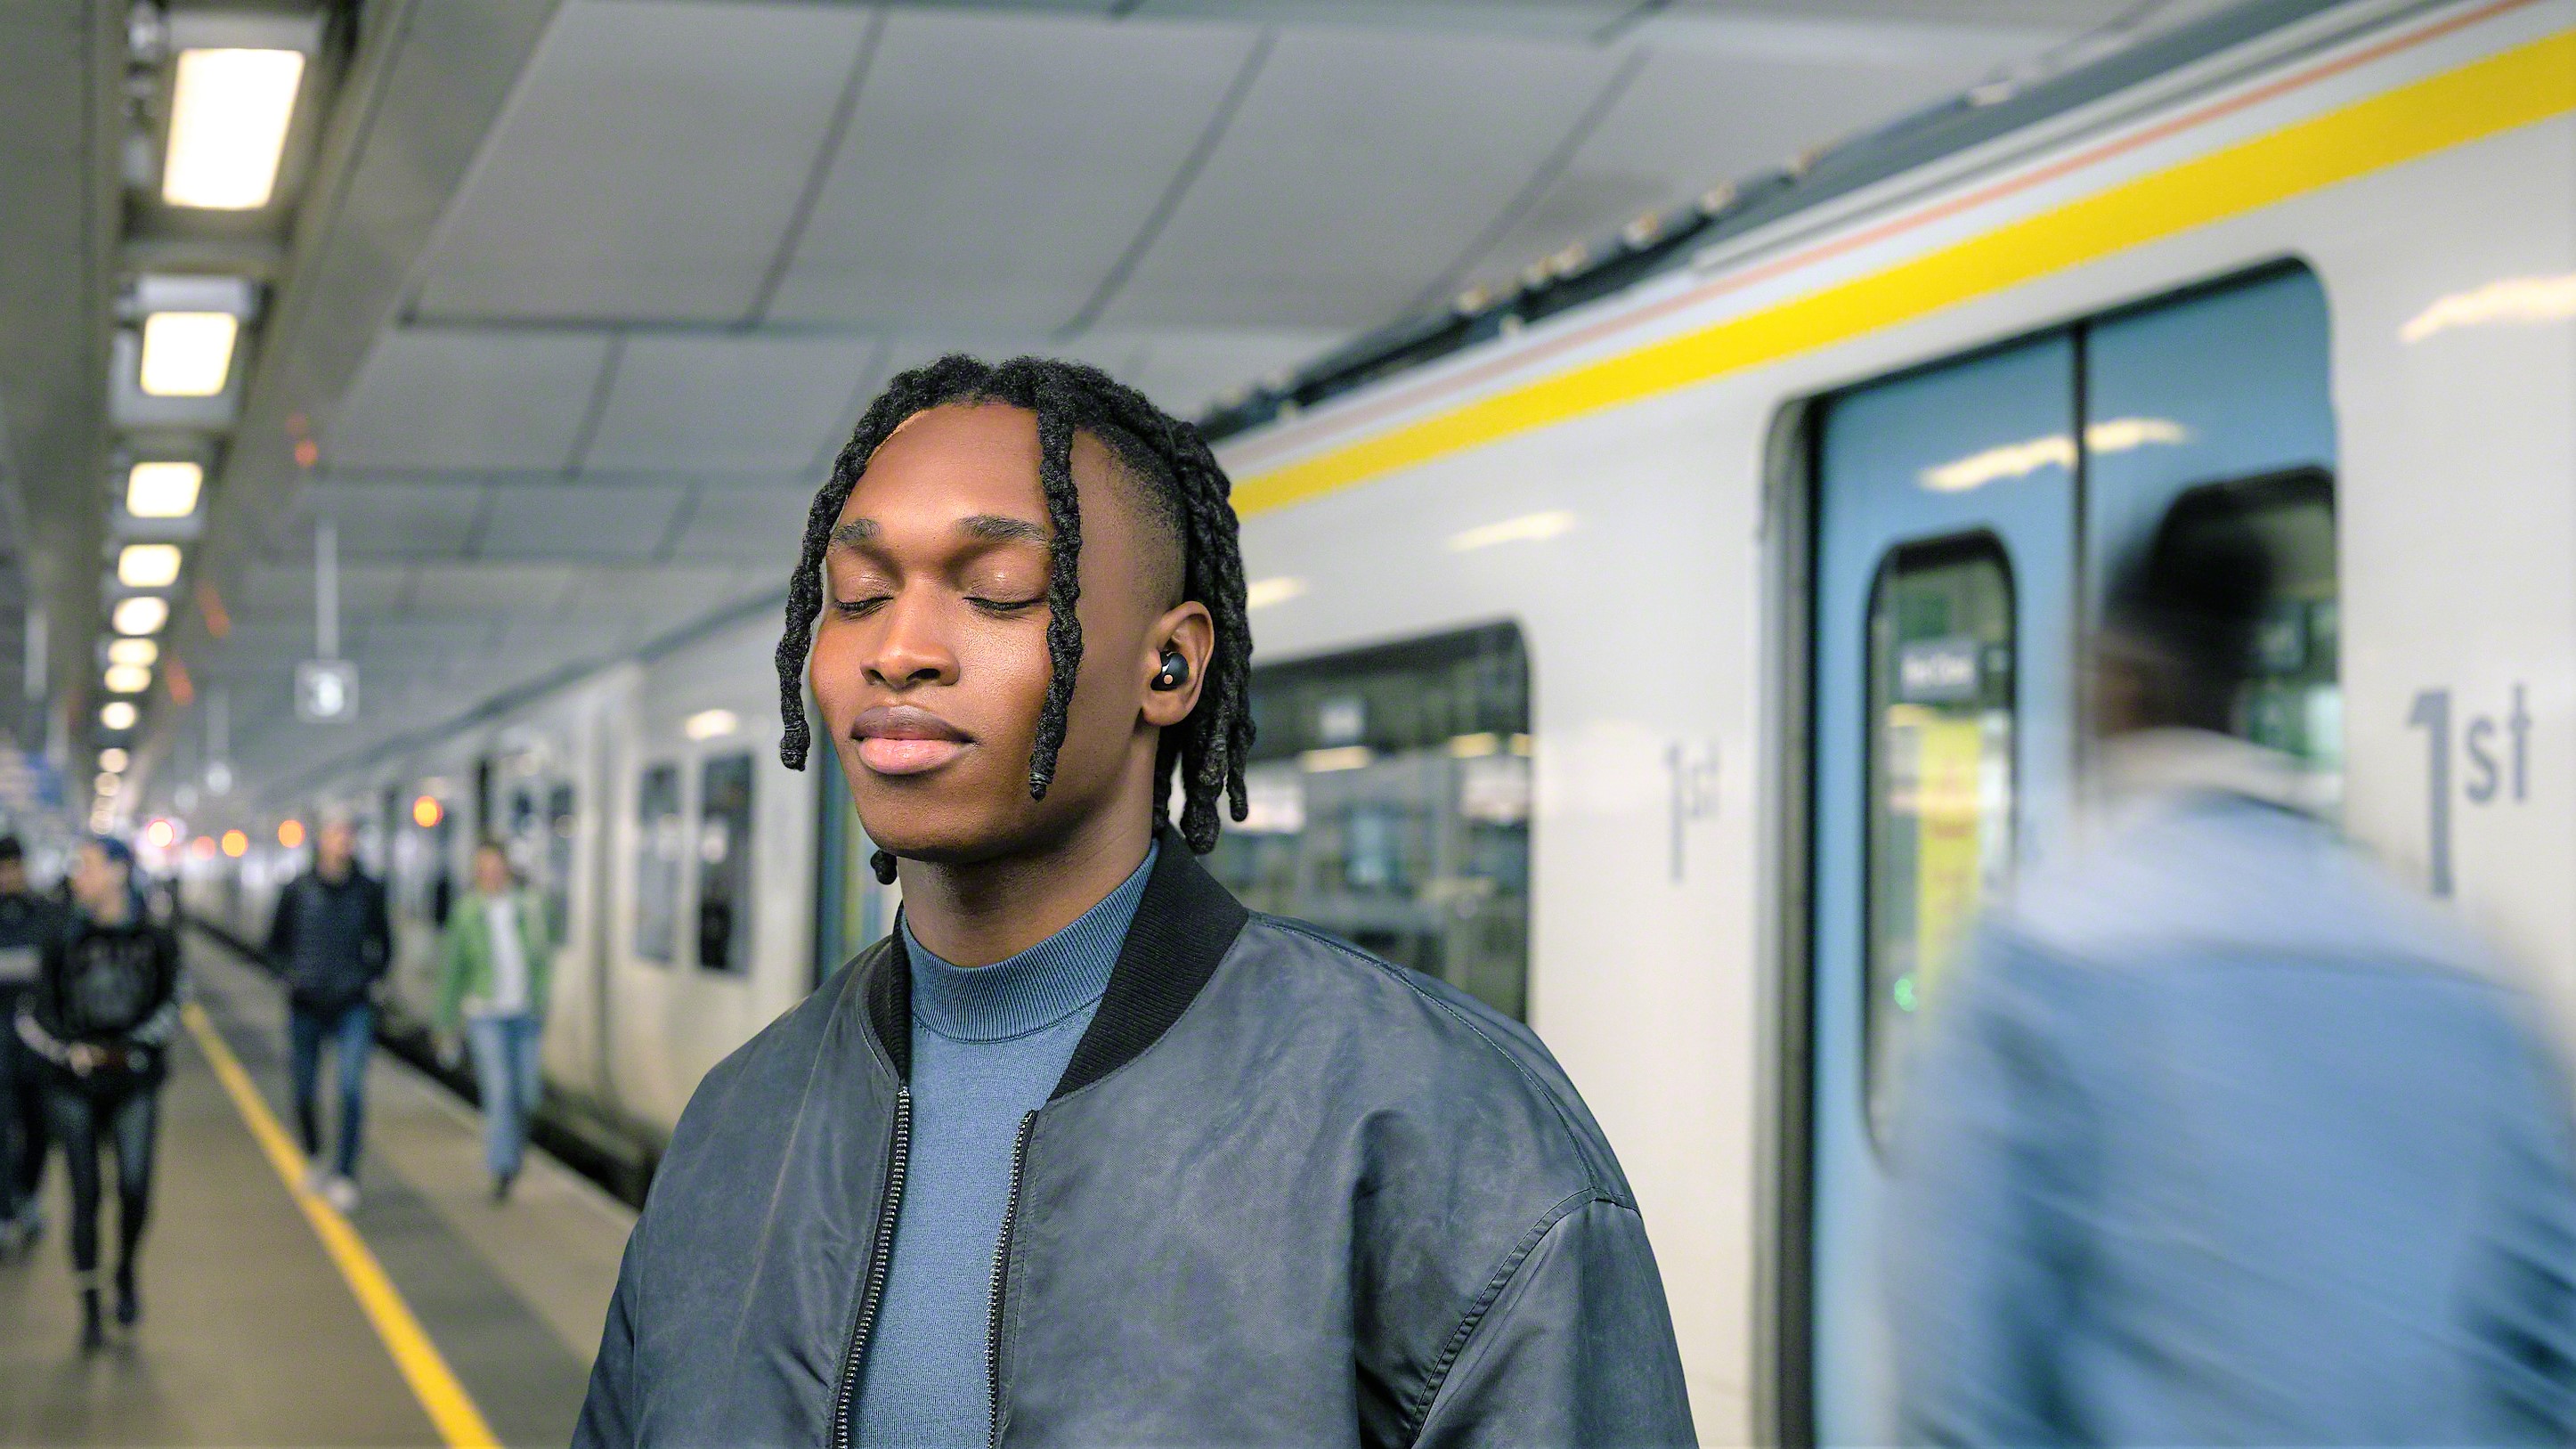 Sony WF-1000XM5 image showing young man wearing earbuds on an underground station platform